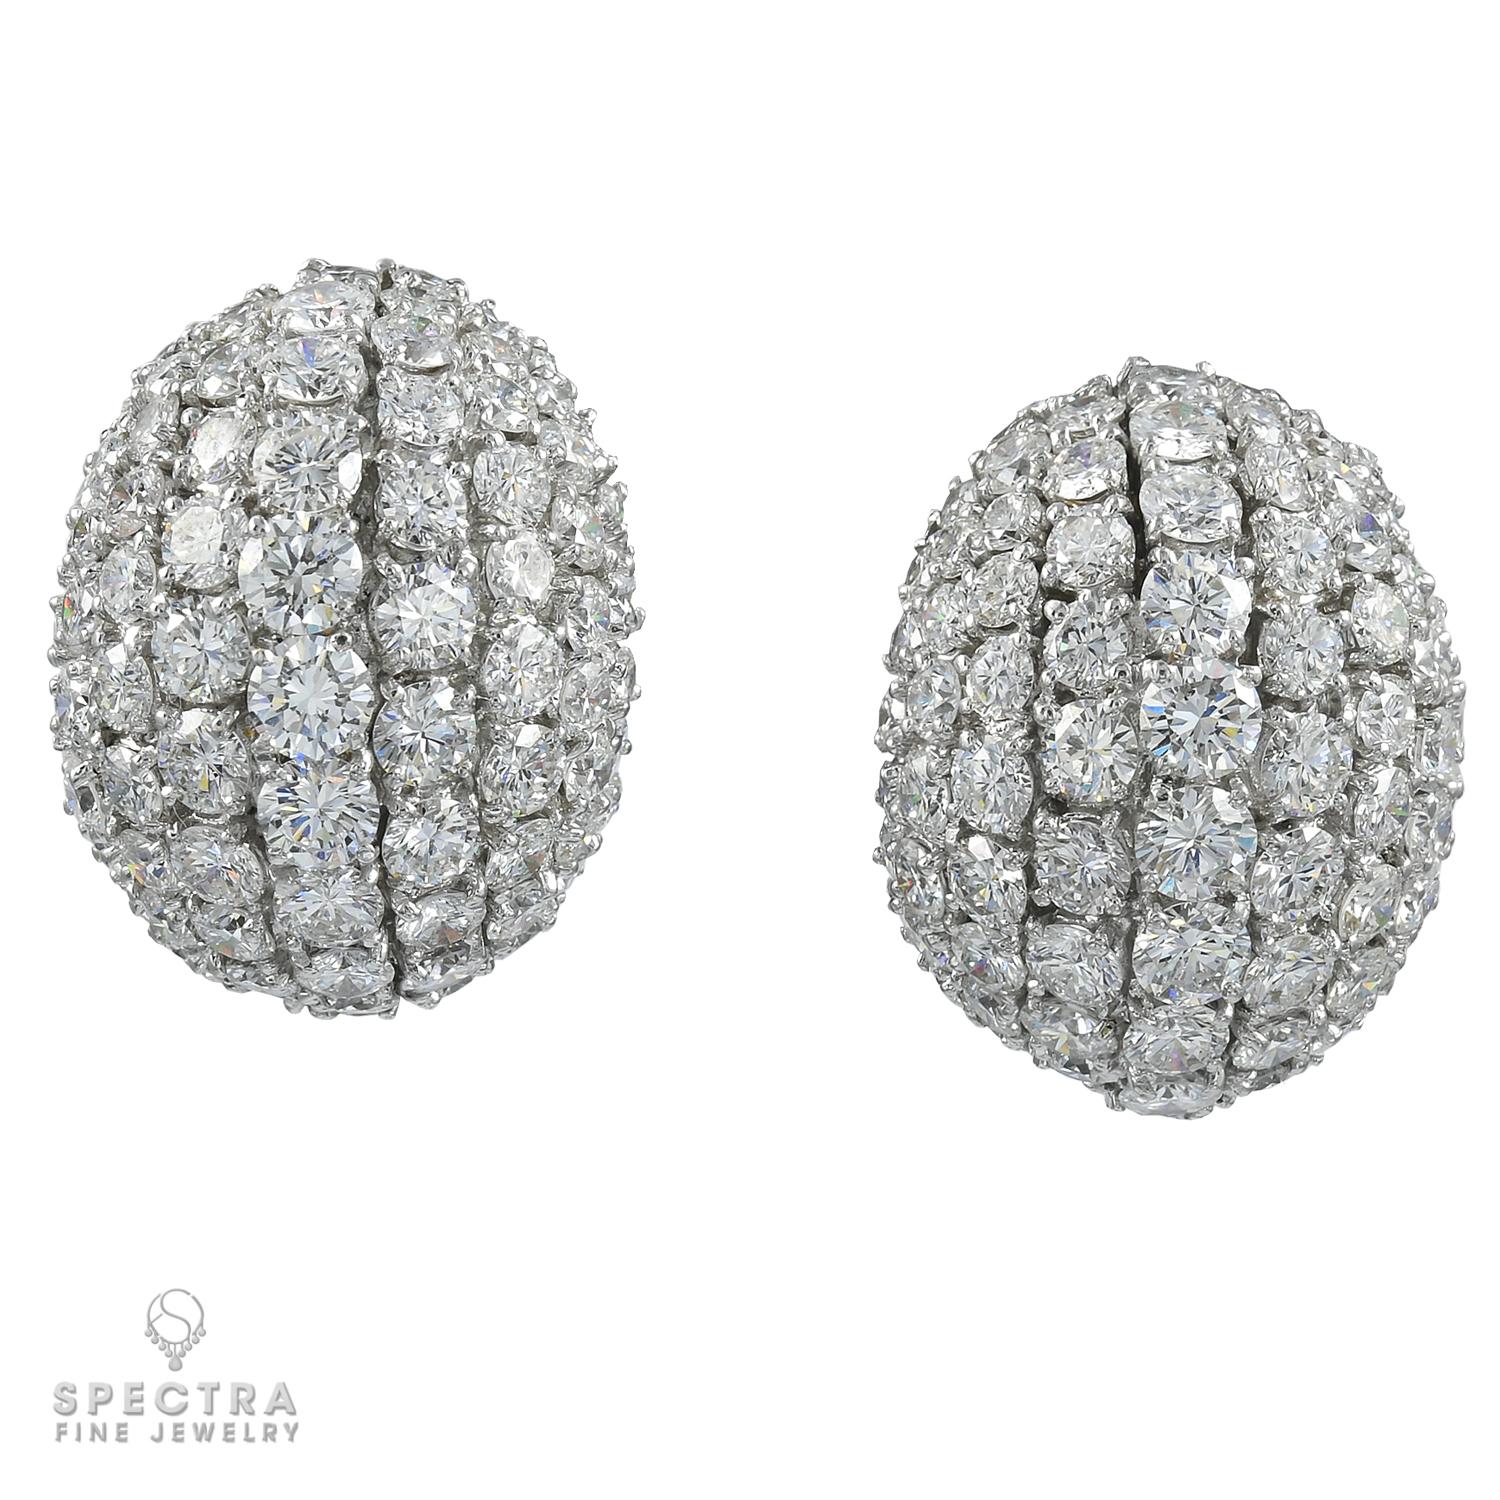 Spectra Fine Jewelry Diamond 'Dome' Earrings in 18kt Gold In New Condition For Sale In New York, NY